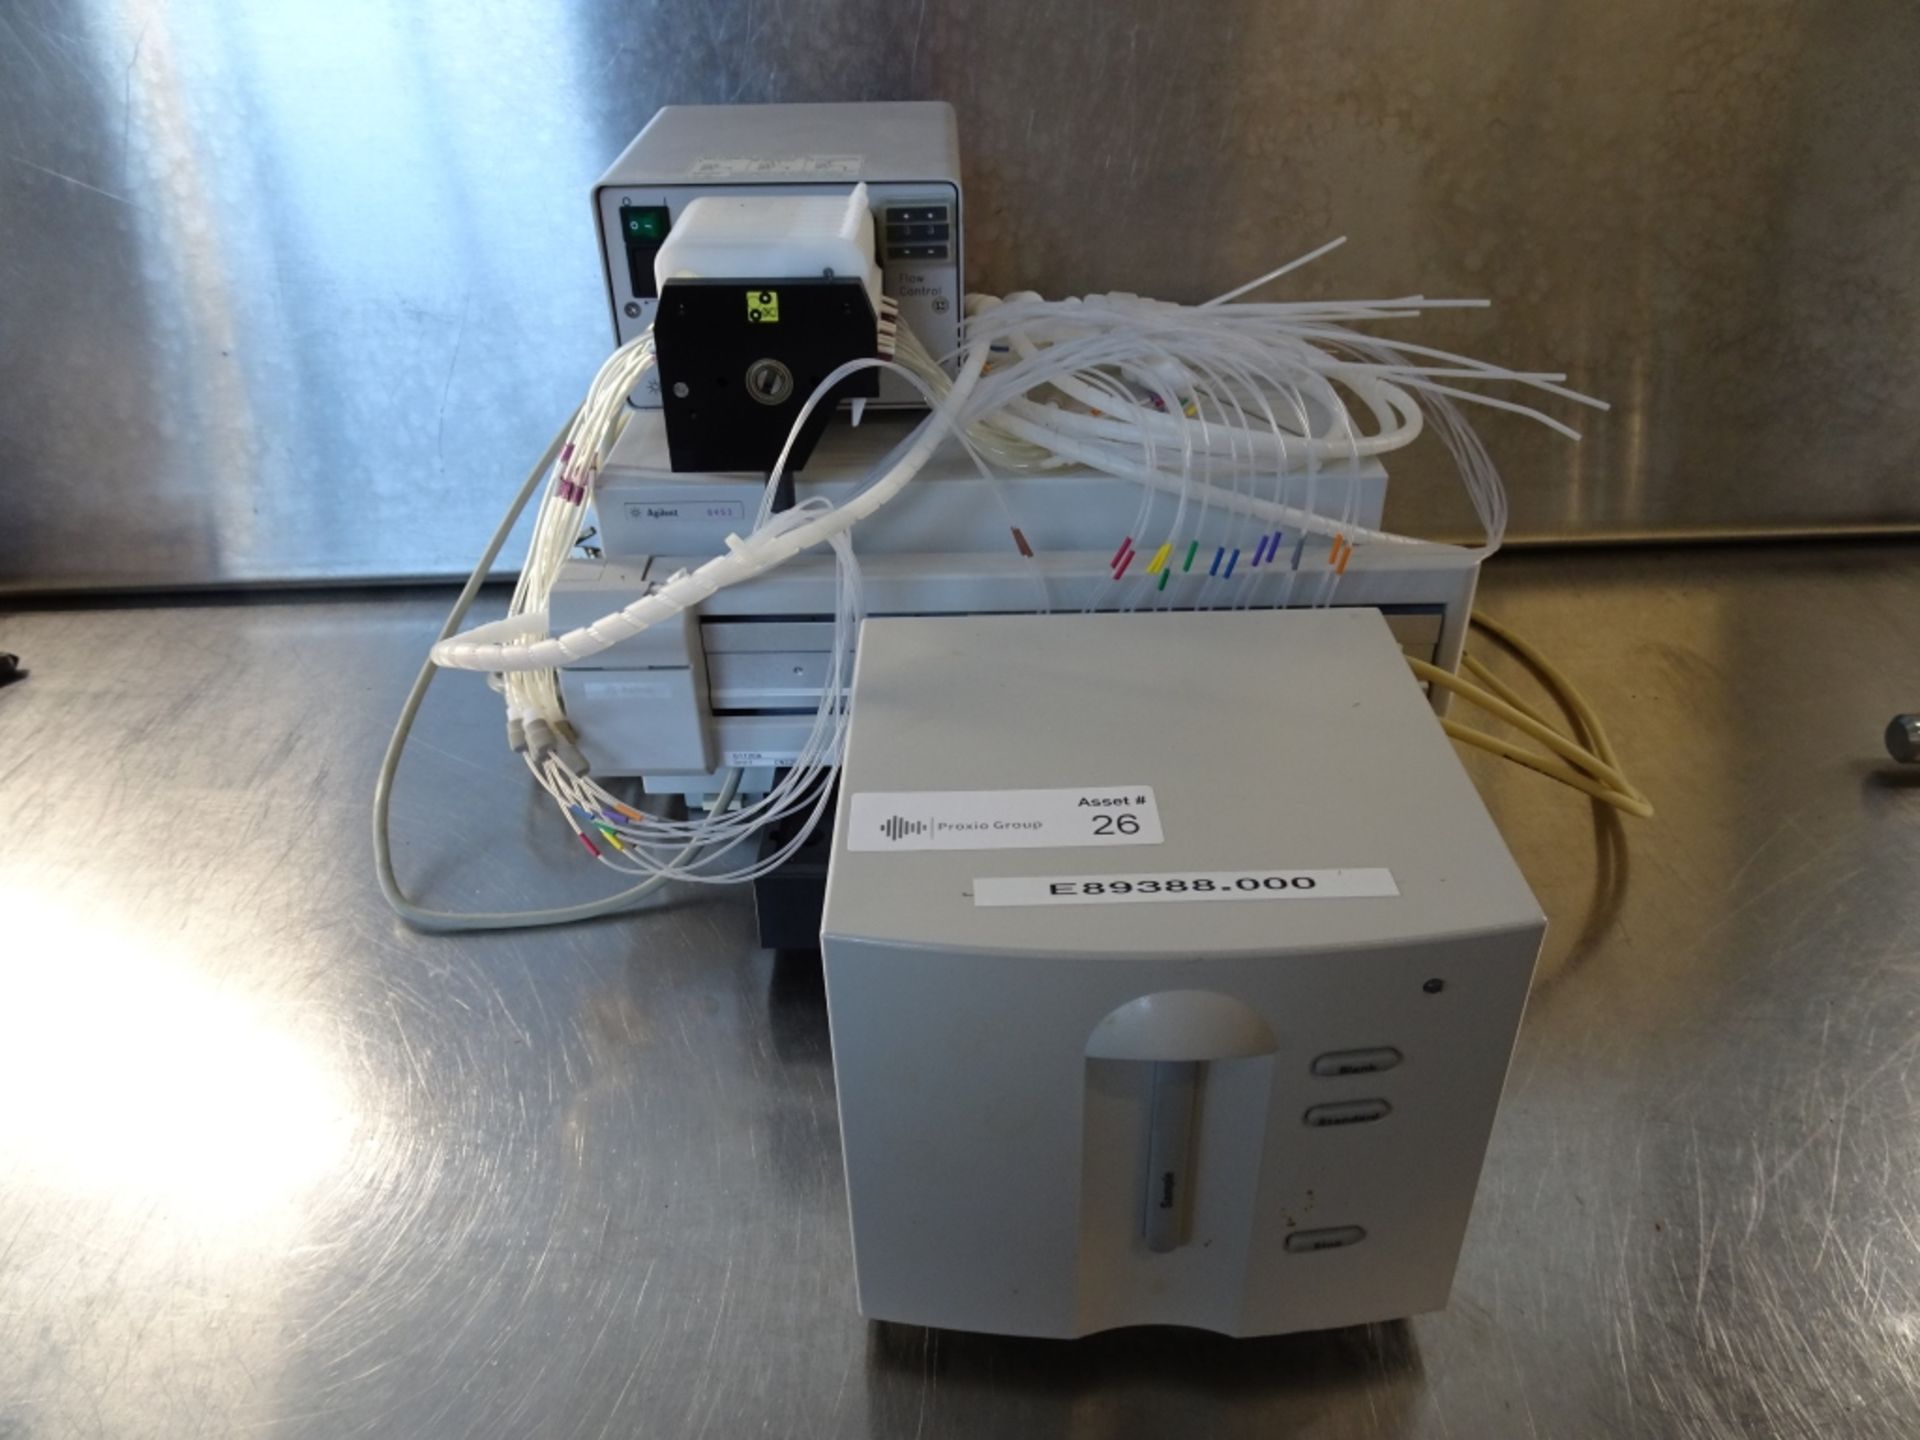 Agilent Model 8453 UV Spectrometer with Transport and Peristaltic Pump